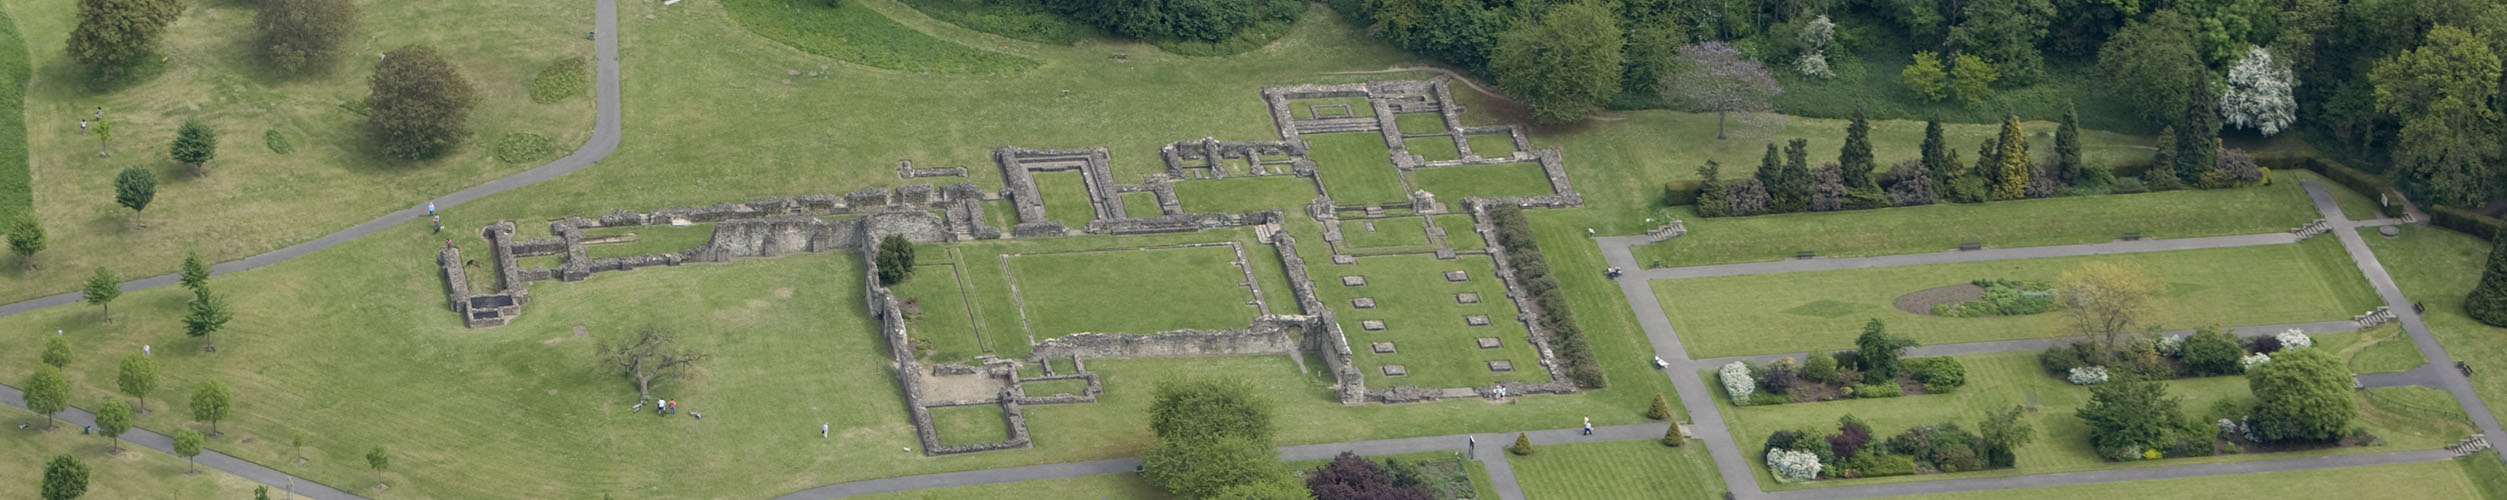 Lesnes Abbey ruins from the air